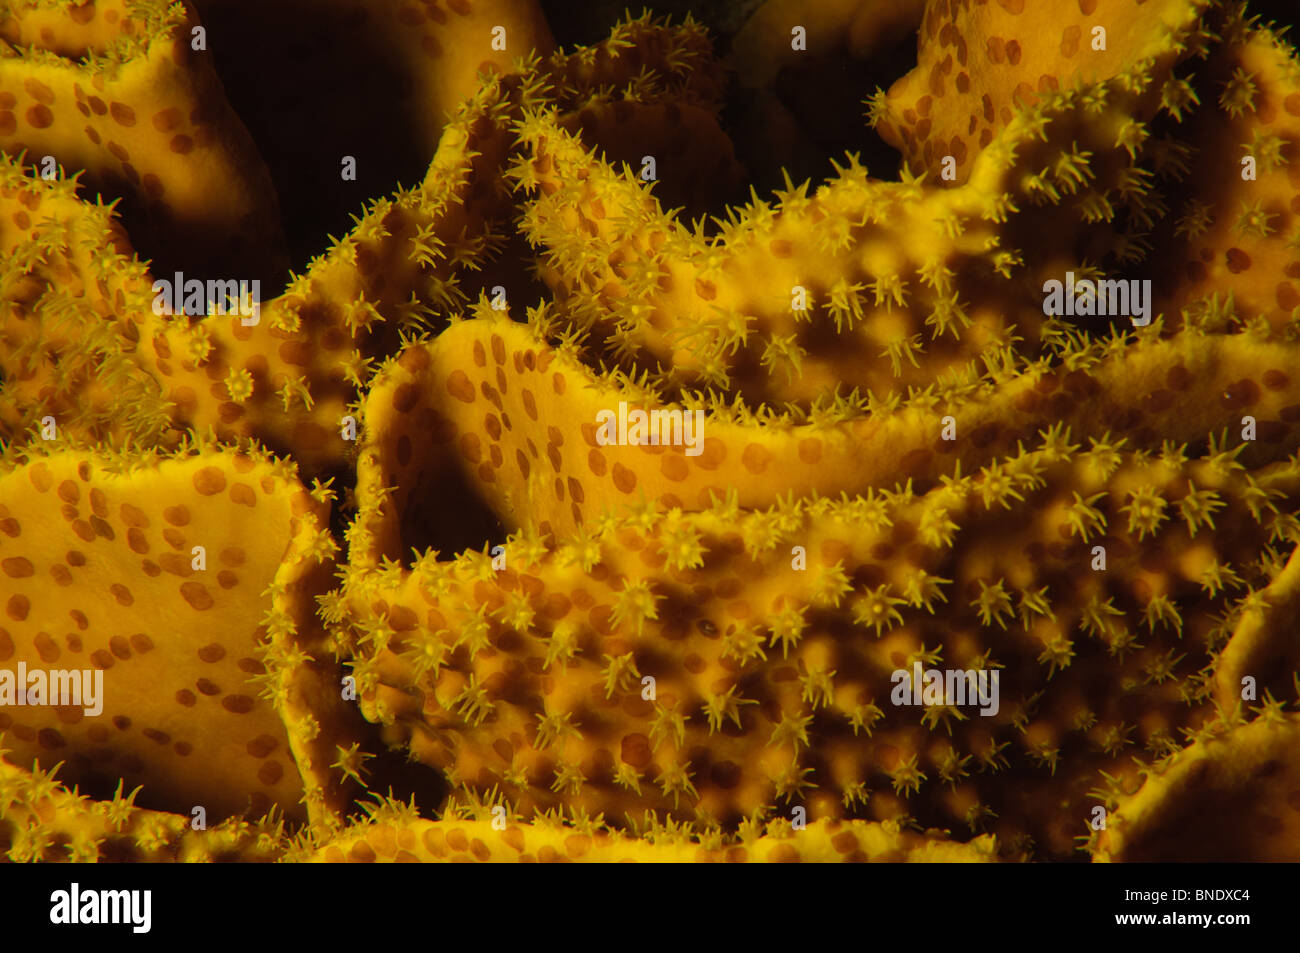 Israel, Eilat, Red Sea, – Underwater photograph of a Star coral (Favia sp.) with extended Polyps at night. Stock Photo